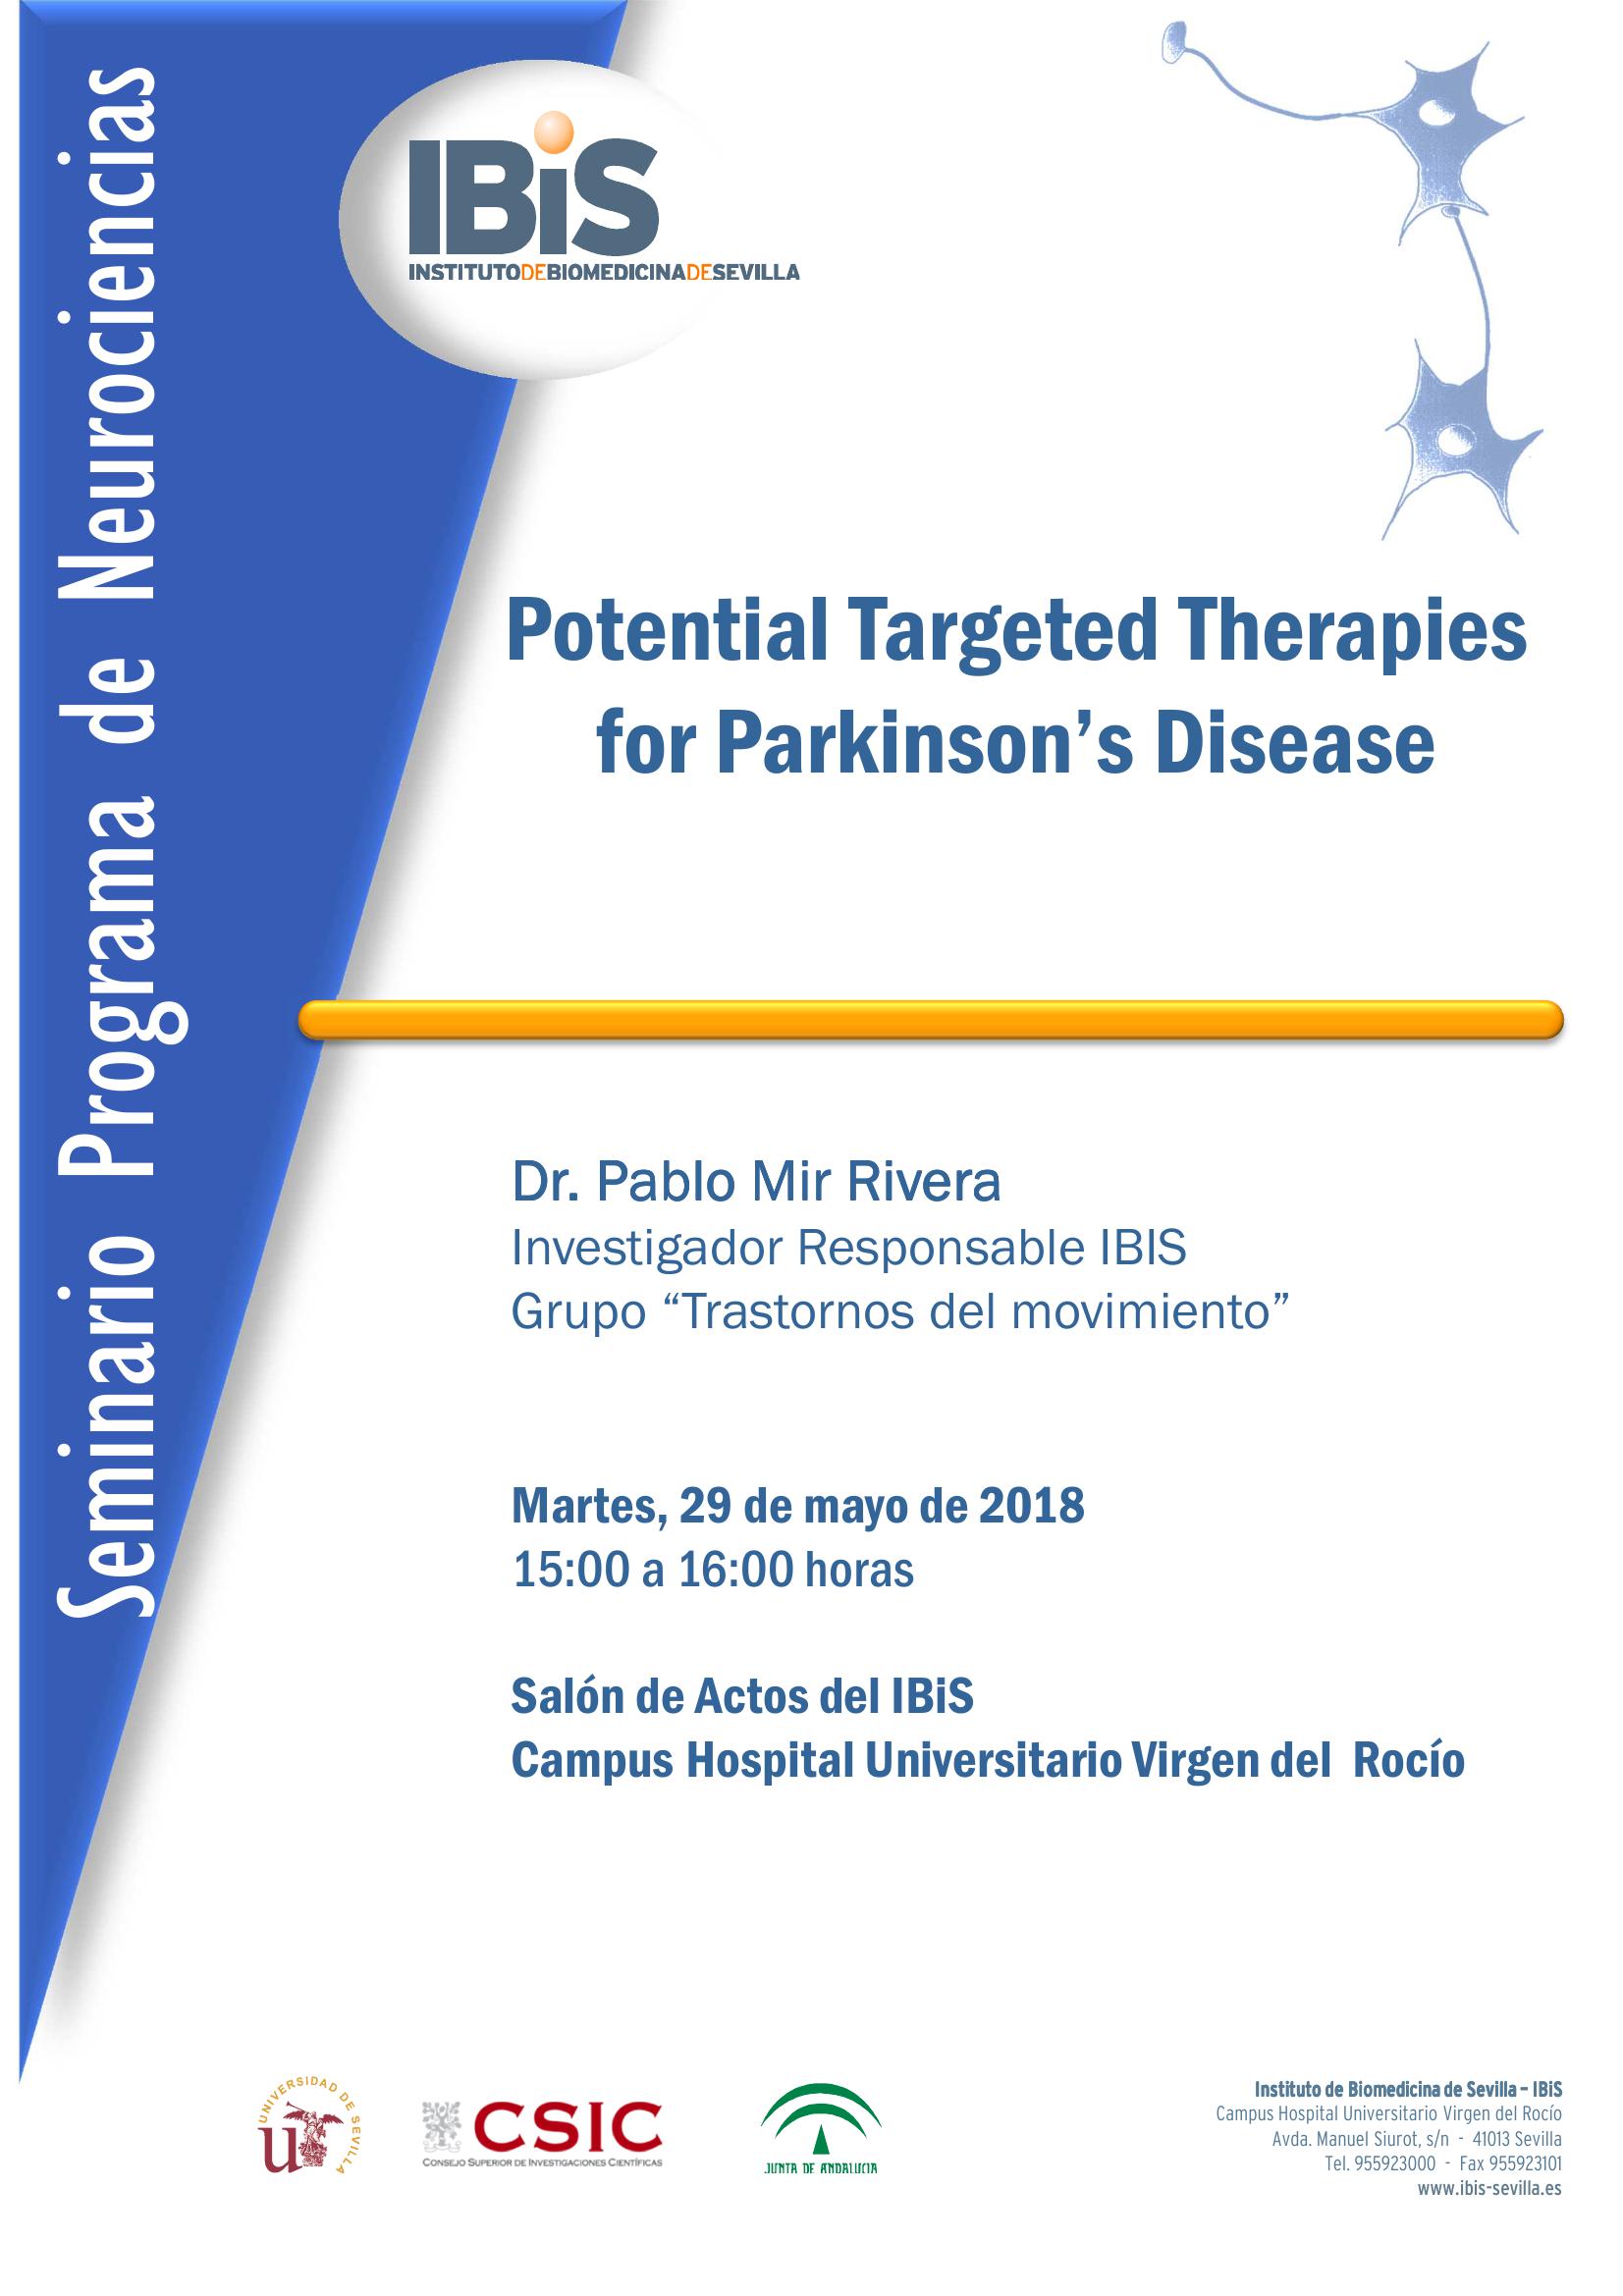 Poster: Potential Targeted Therapies for Parkinson’s Disease